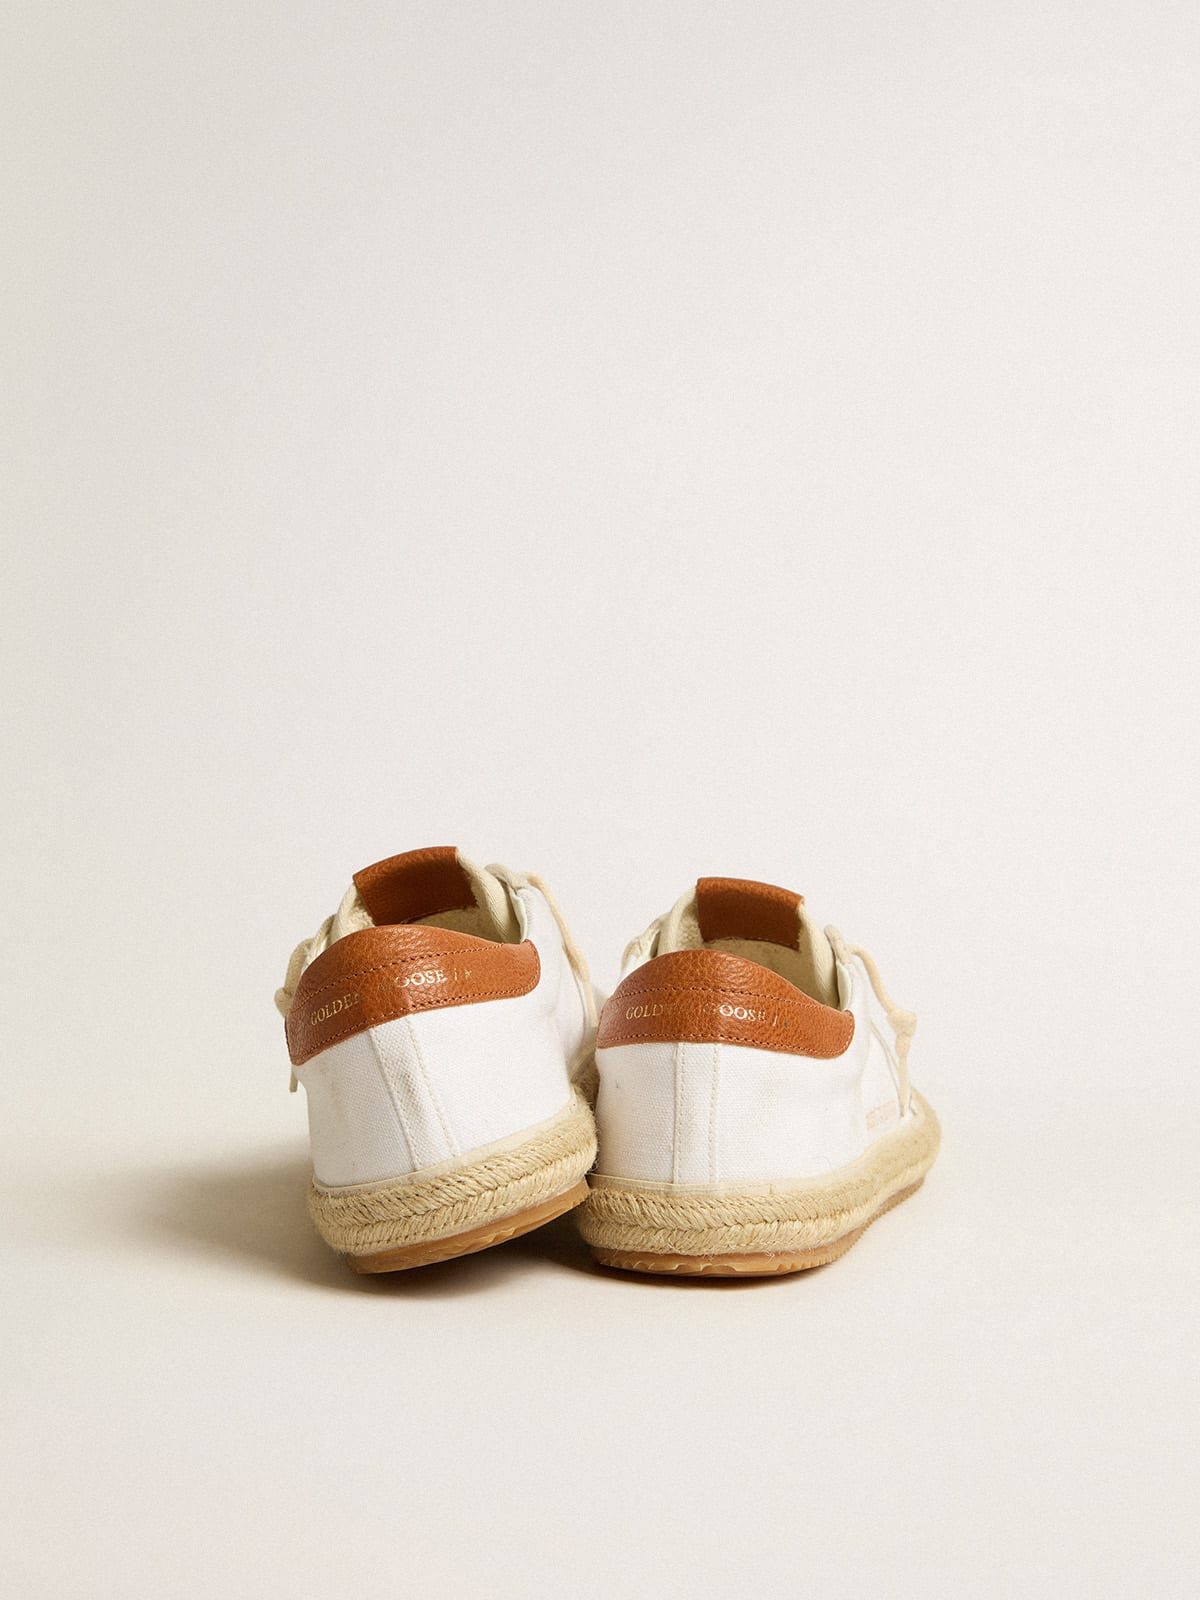 Golden Goose - Women’s Super-Star LTD in canvas with white leather star and raffia toe in 